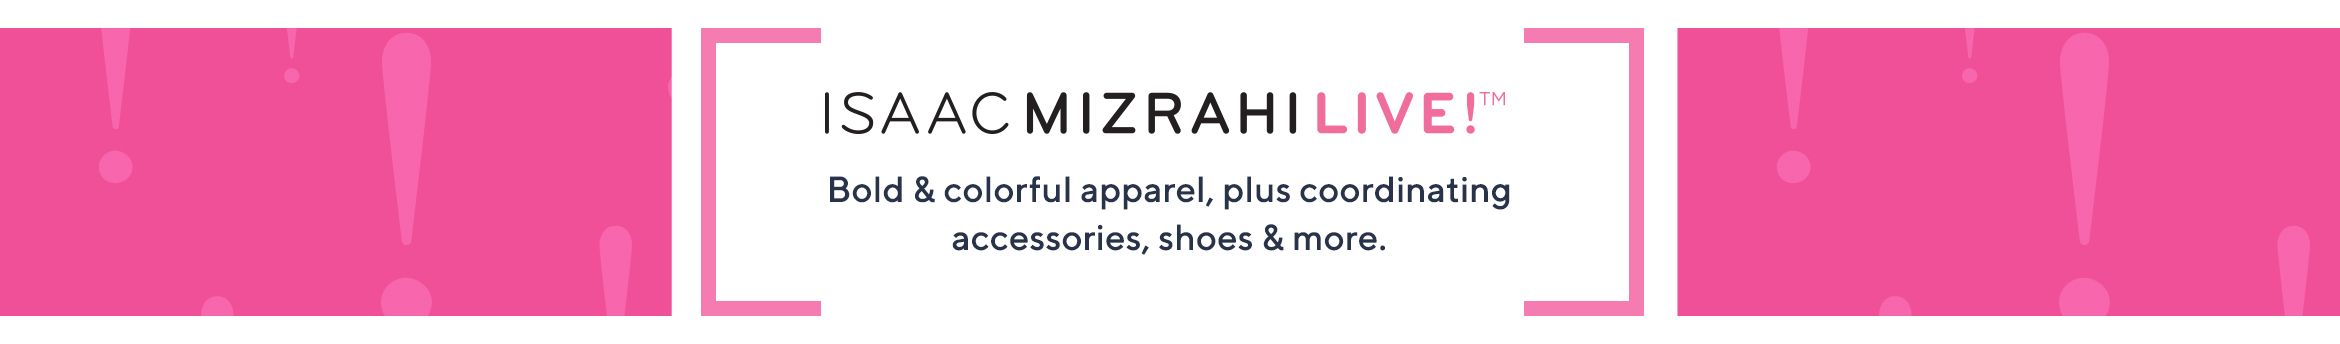 Isaac Mizrahi Live.  Bold & colorful apparel, plus coordinating accessories, shoes & more.